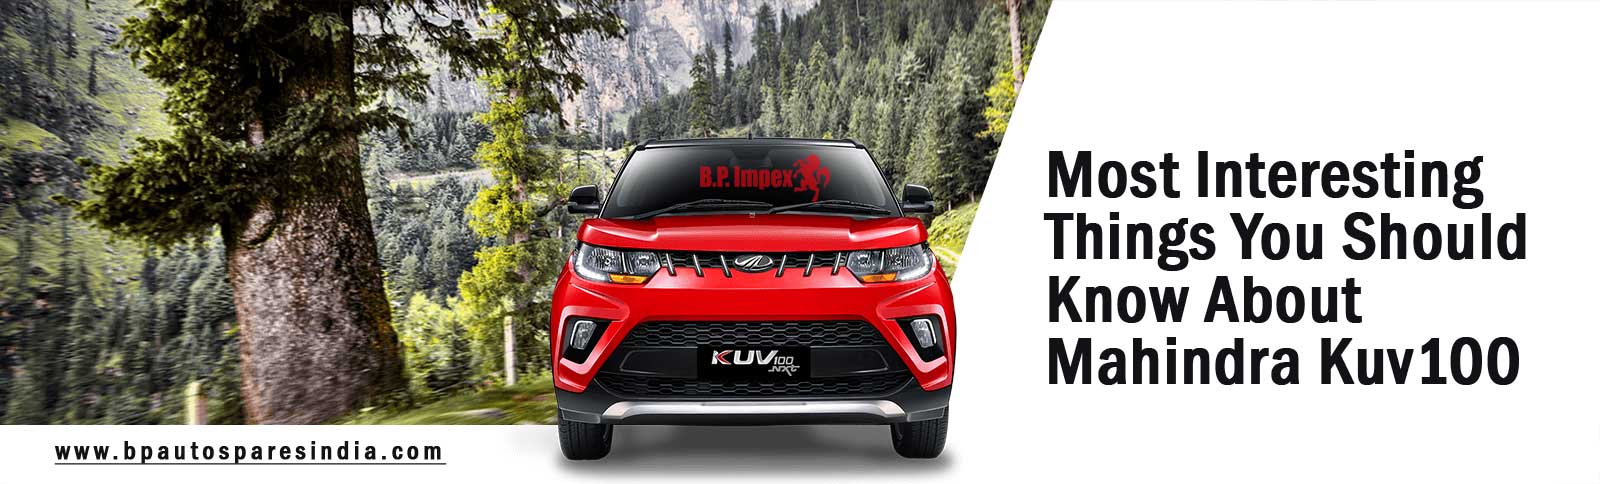 Most Interesting Things You Should Know About Mahindra Kuv100